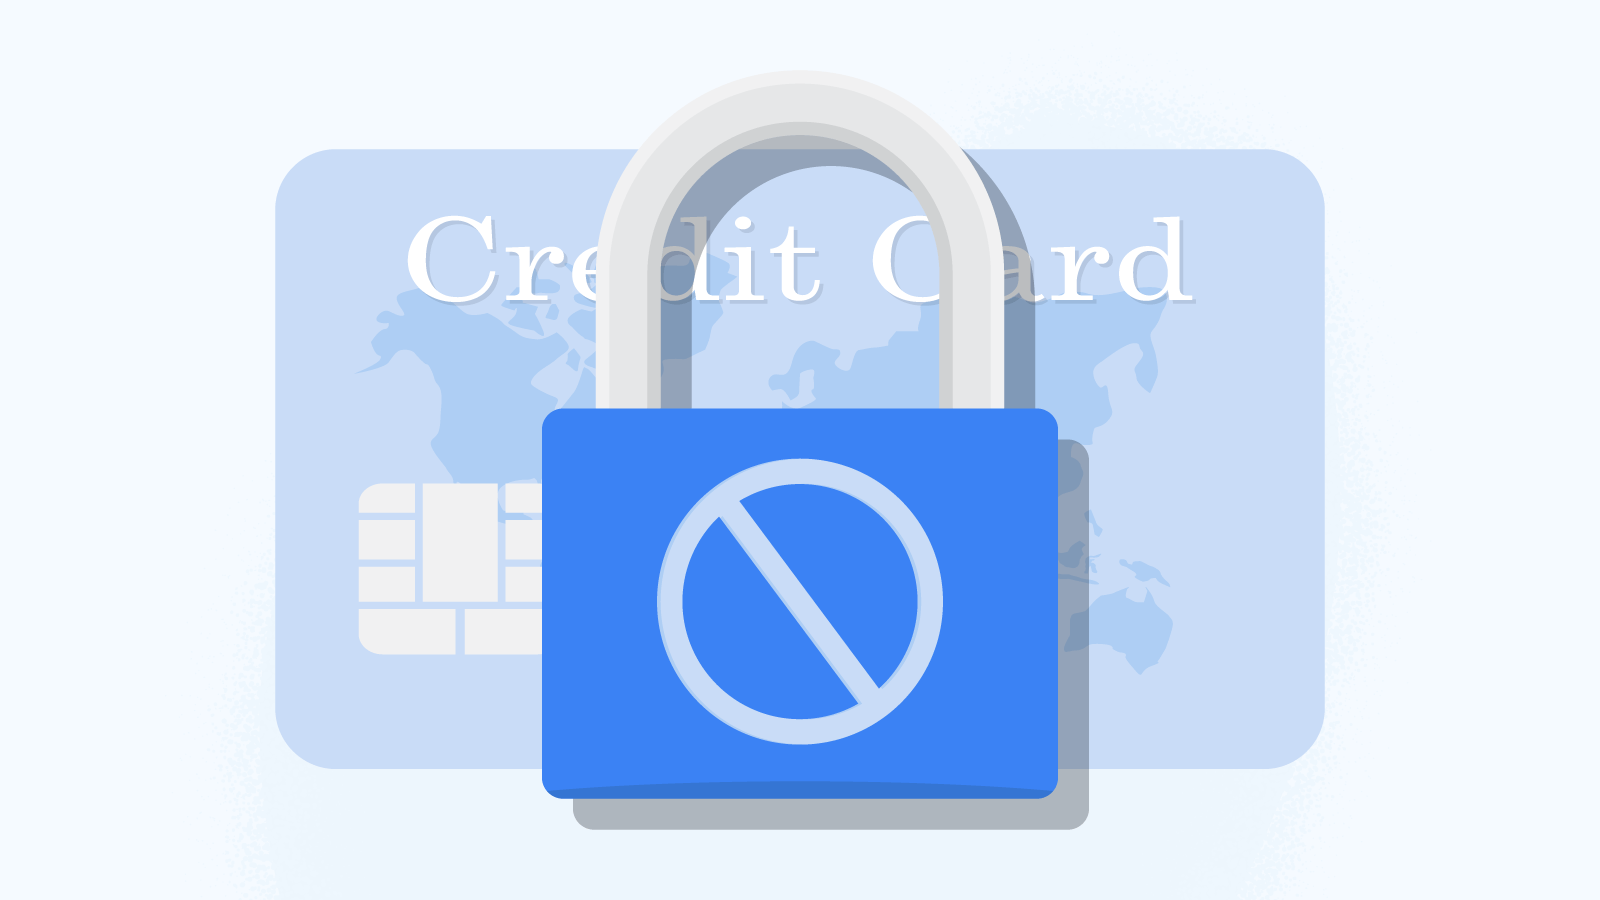 Reasons for banning credit cards in gambling